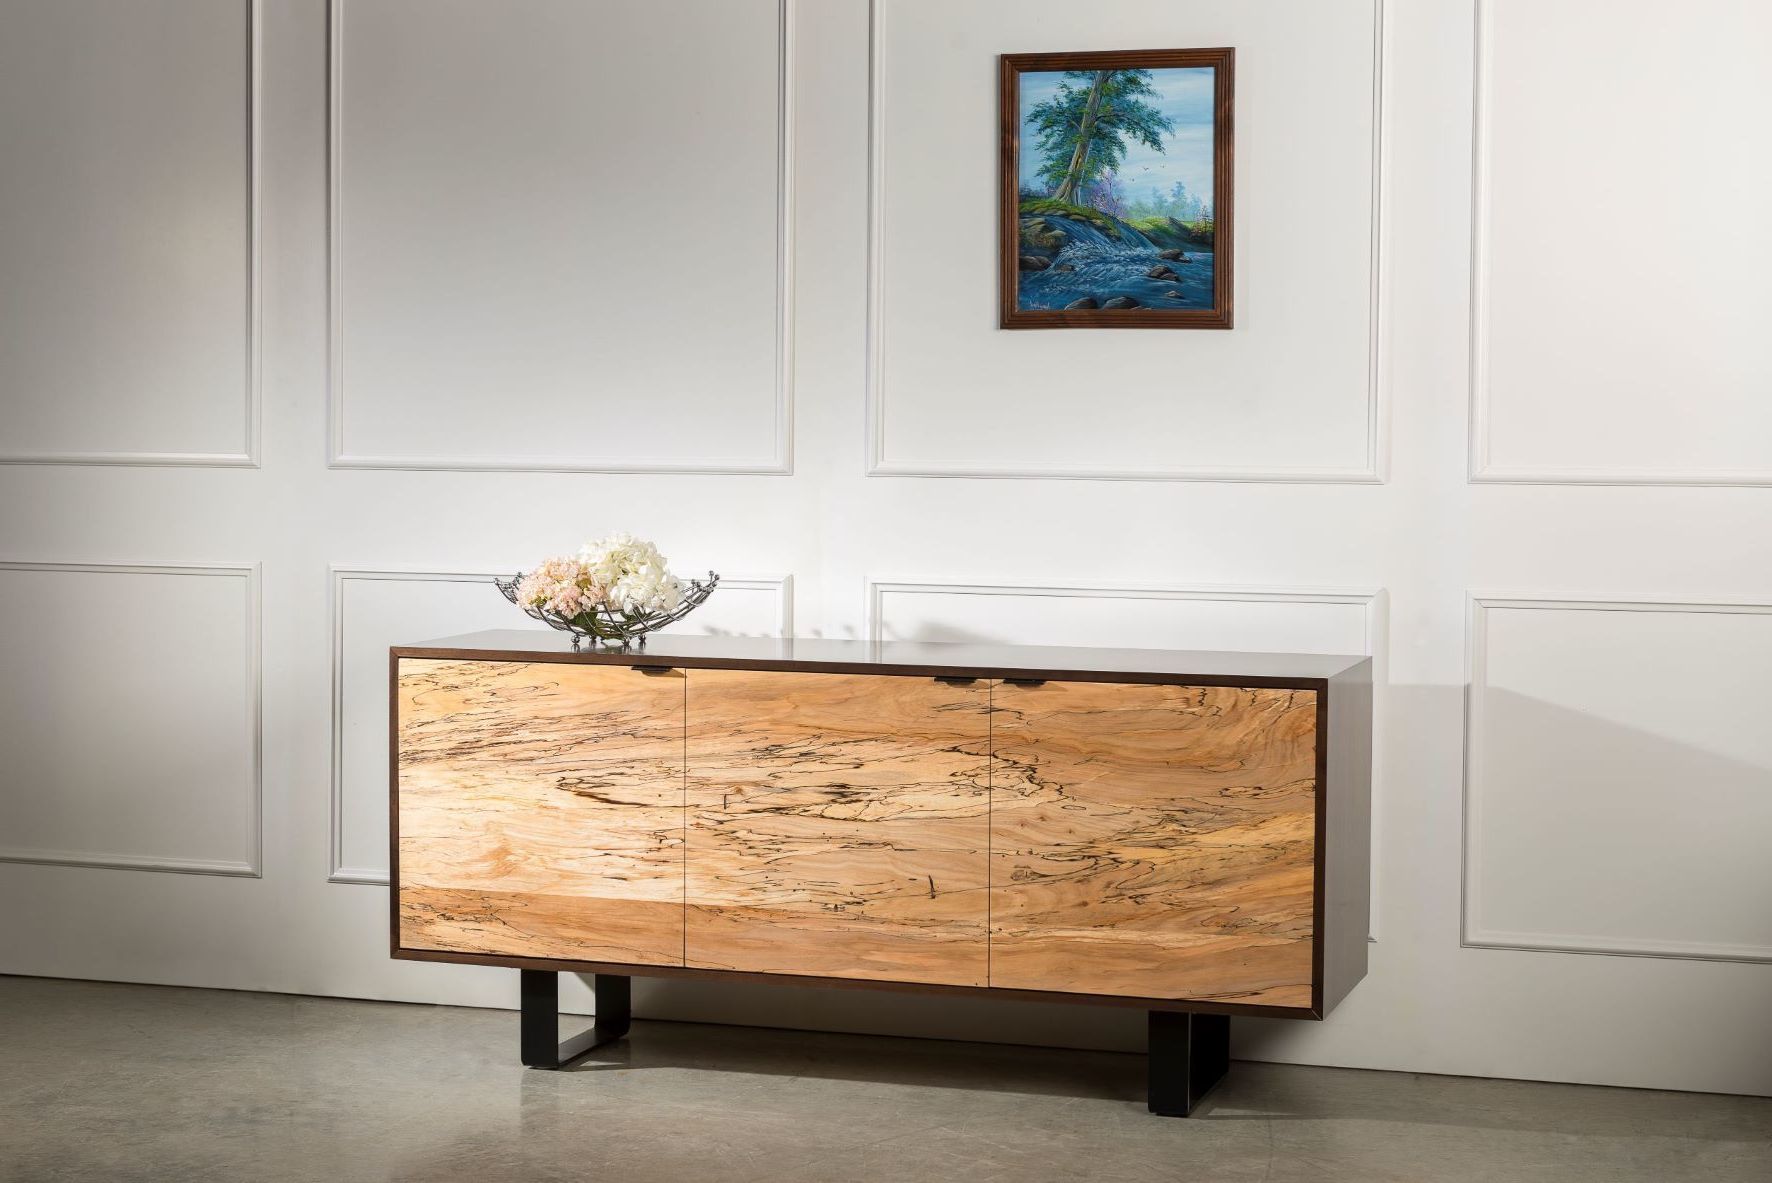 Amish Solid Wood Sideboards & Buffets From Dutchcrafters Amish Regarding 2019 Solid Wood Buffet Sideboards (View 2 of 15)